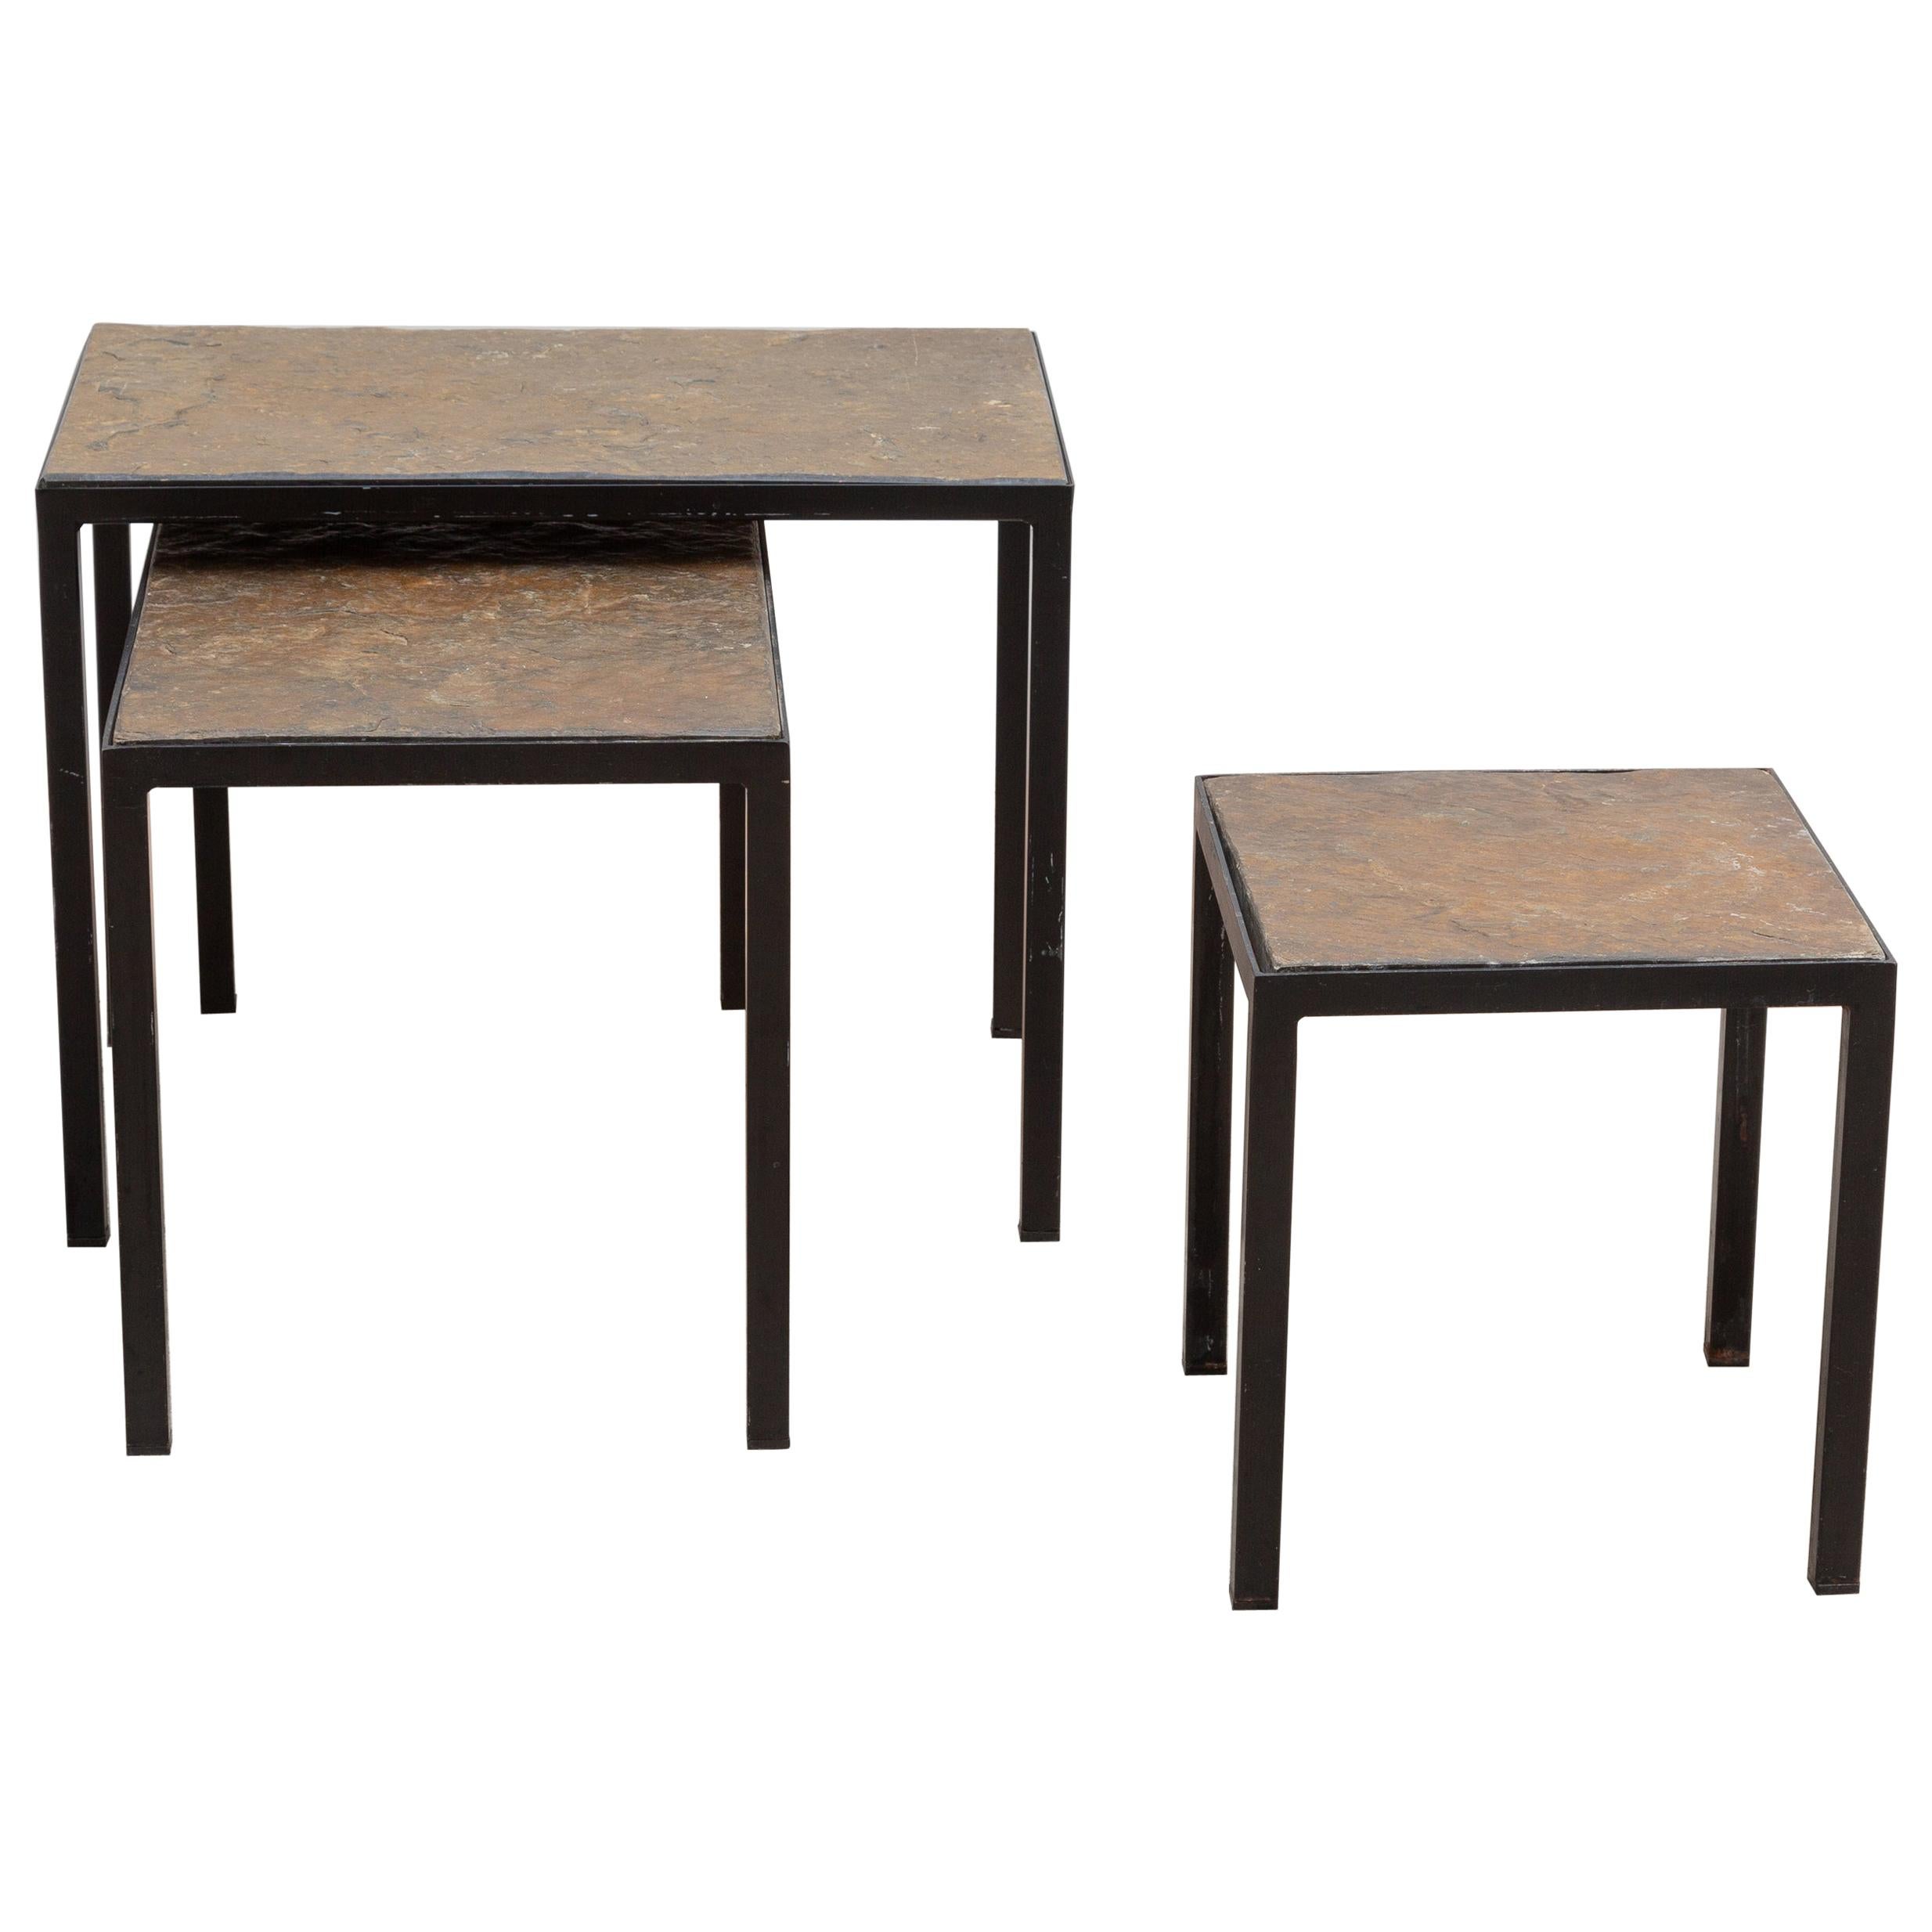 Minimalist Slate Stone and Metal Nesting Tables For Sale